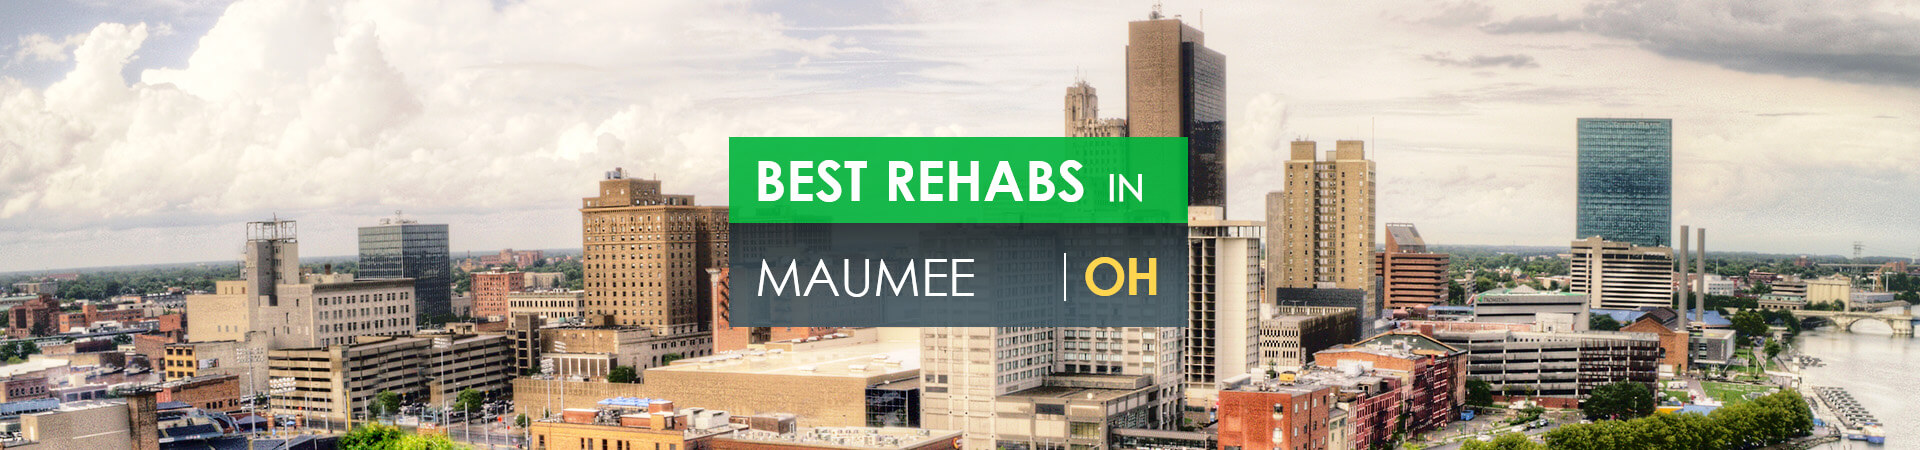 Best rehabs in Maumee, OH